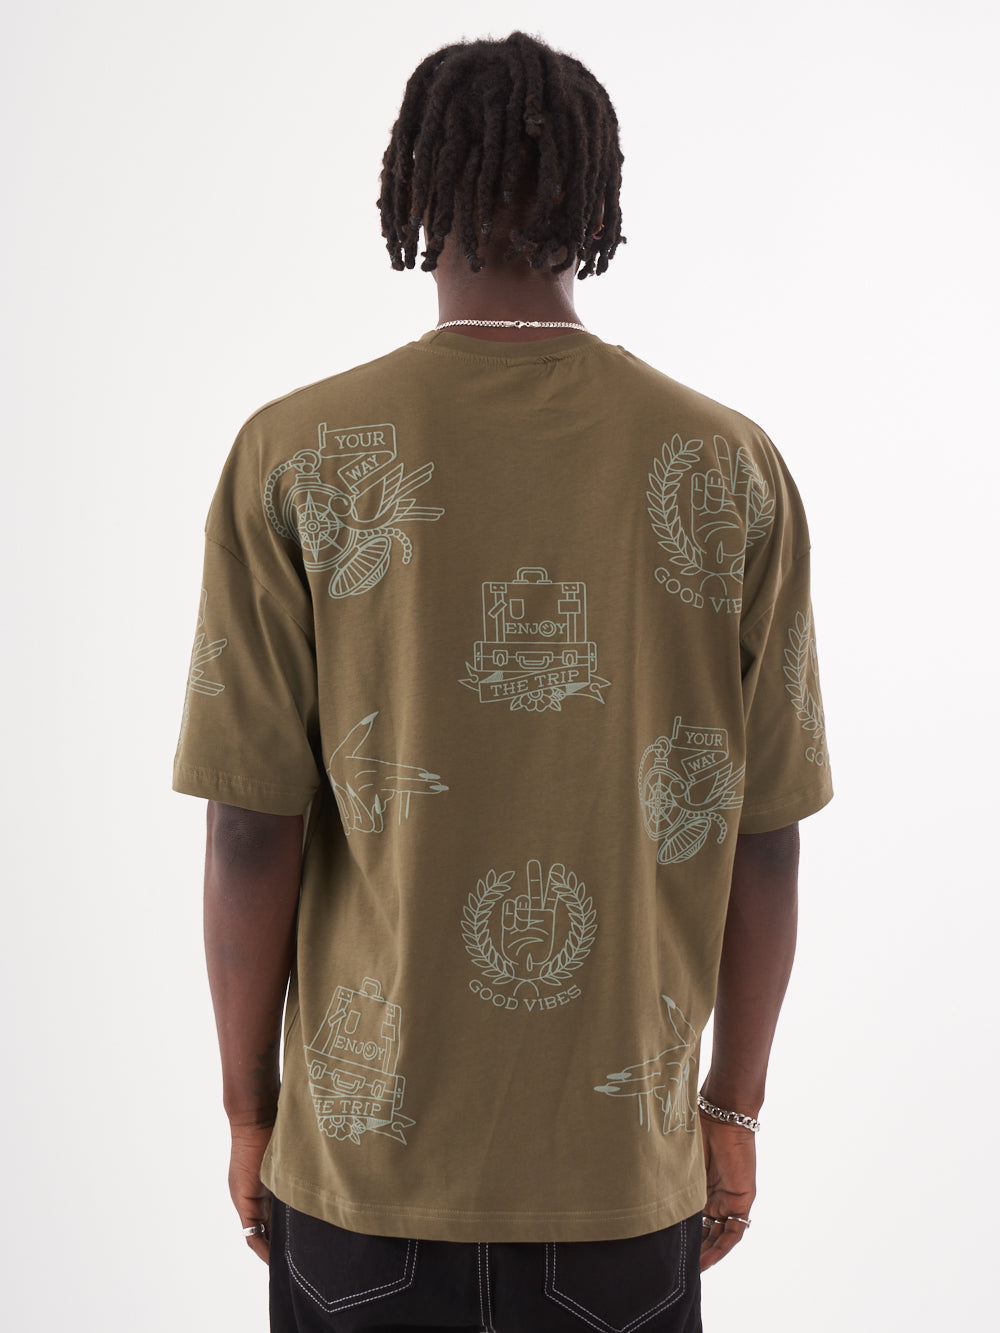 The back view of a man wearing an olive color VICTORY oversized t-shirt by Sernes Streetwear